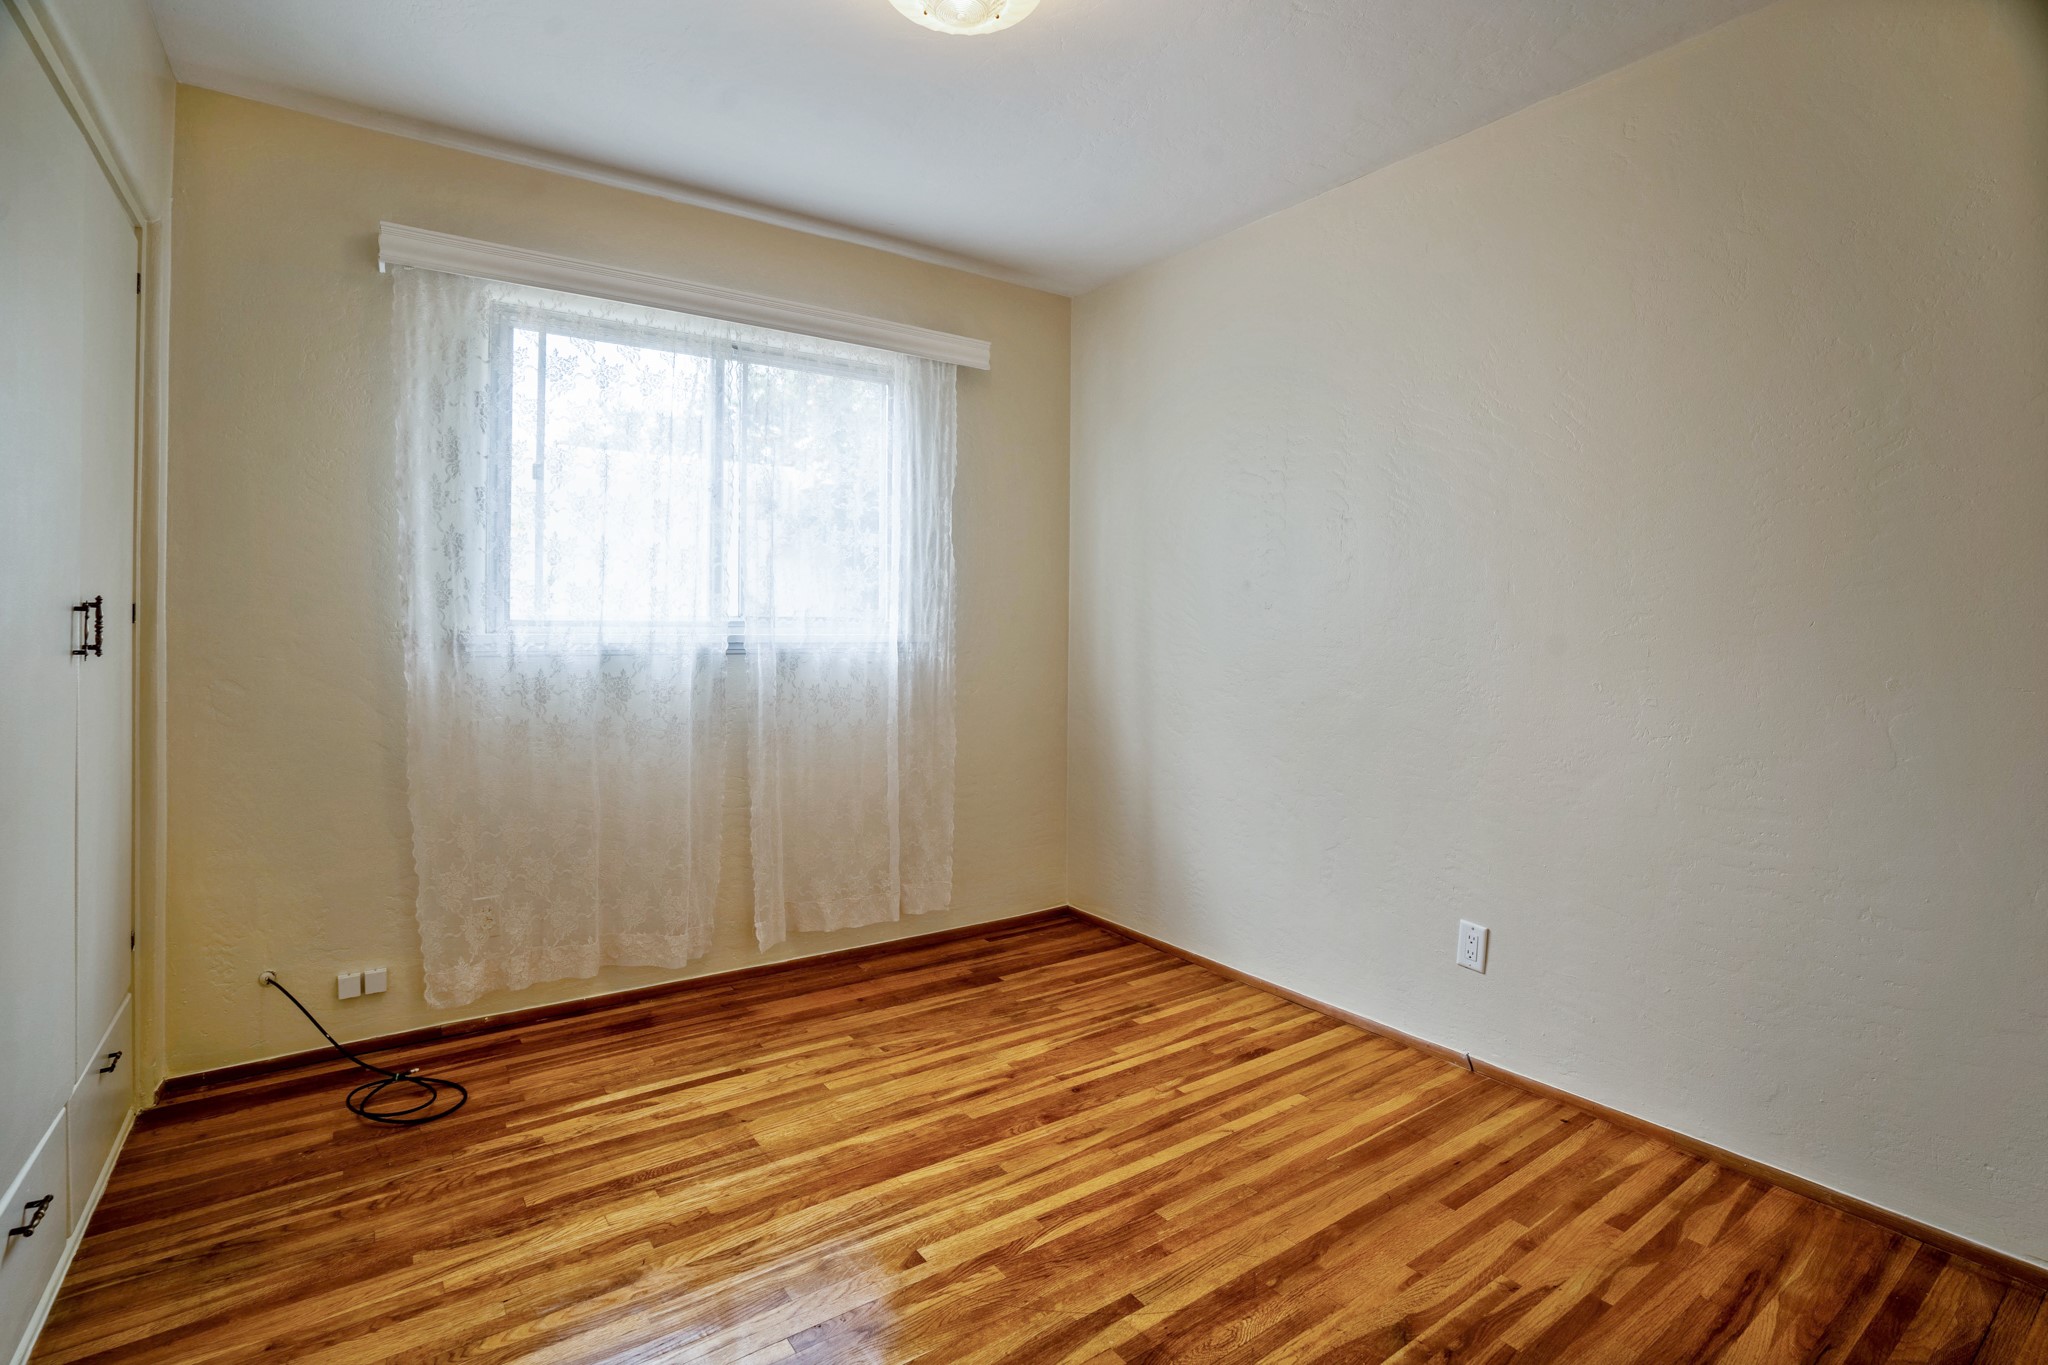 2nd bedroom with hard wood floors and built in closets